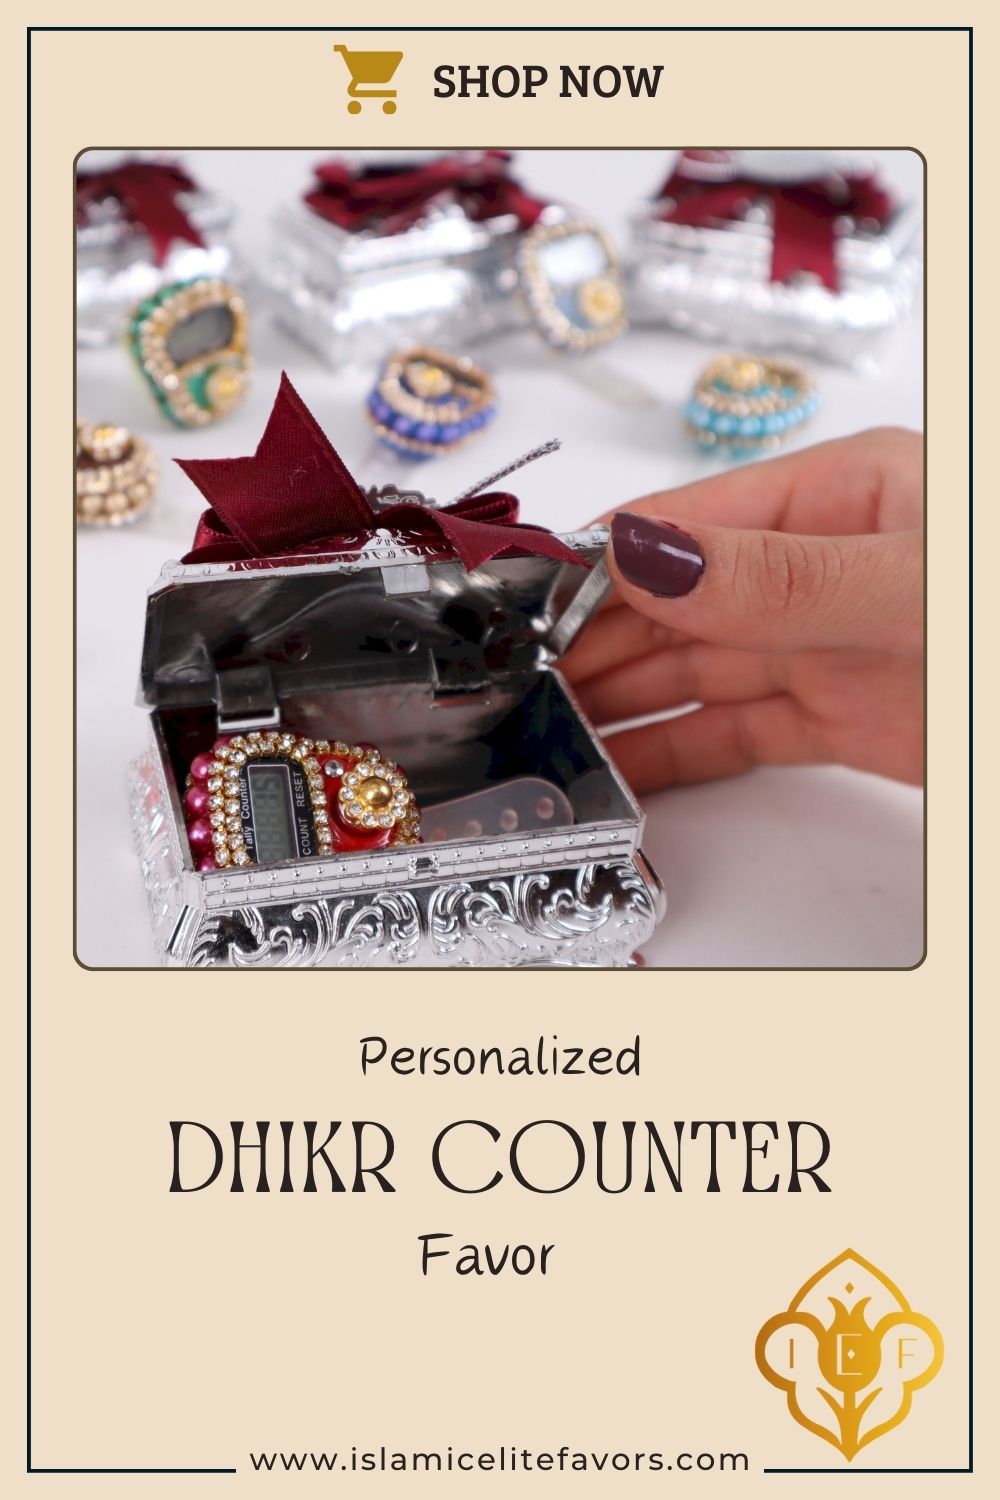 Personalized Dhikr Counter Ramadan Eid Islamic Favors Wedding Gift - Islamic Elite Favors is a handmade gift shop offering a wide variety of unique and personalized gifts for all occasions. Whether you're looking for the perfect Ramadan, Eid, Hajj, wedding gift or something special for a birthday, baby shower or anniversary, we have something for everyone. High quality, made with love.